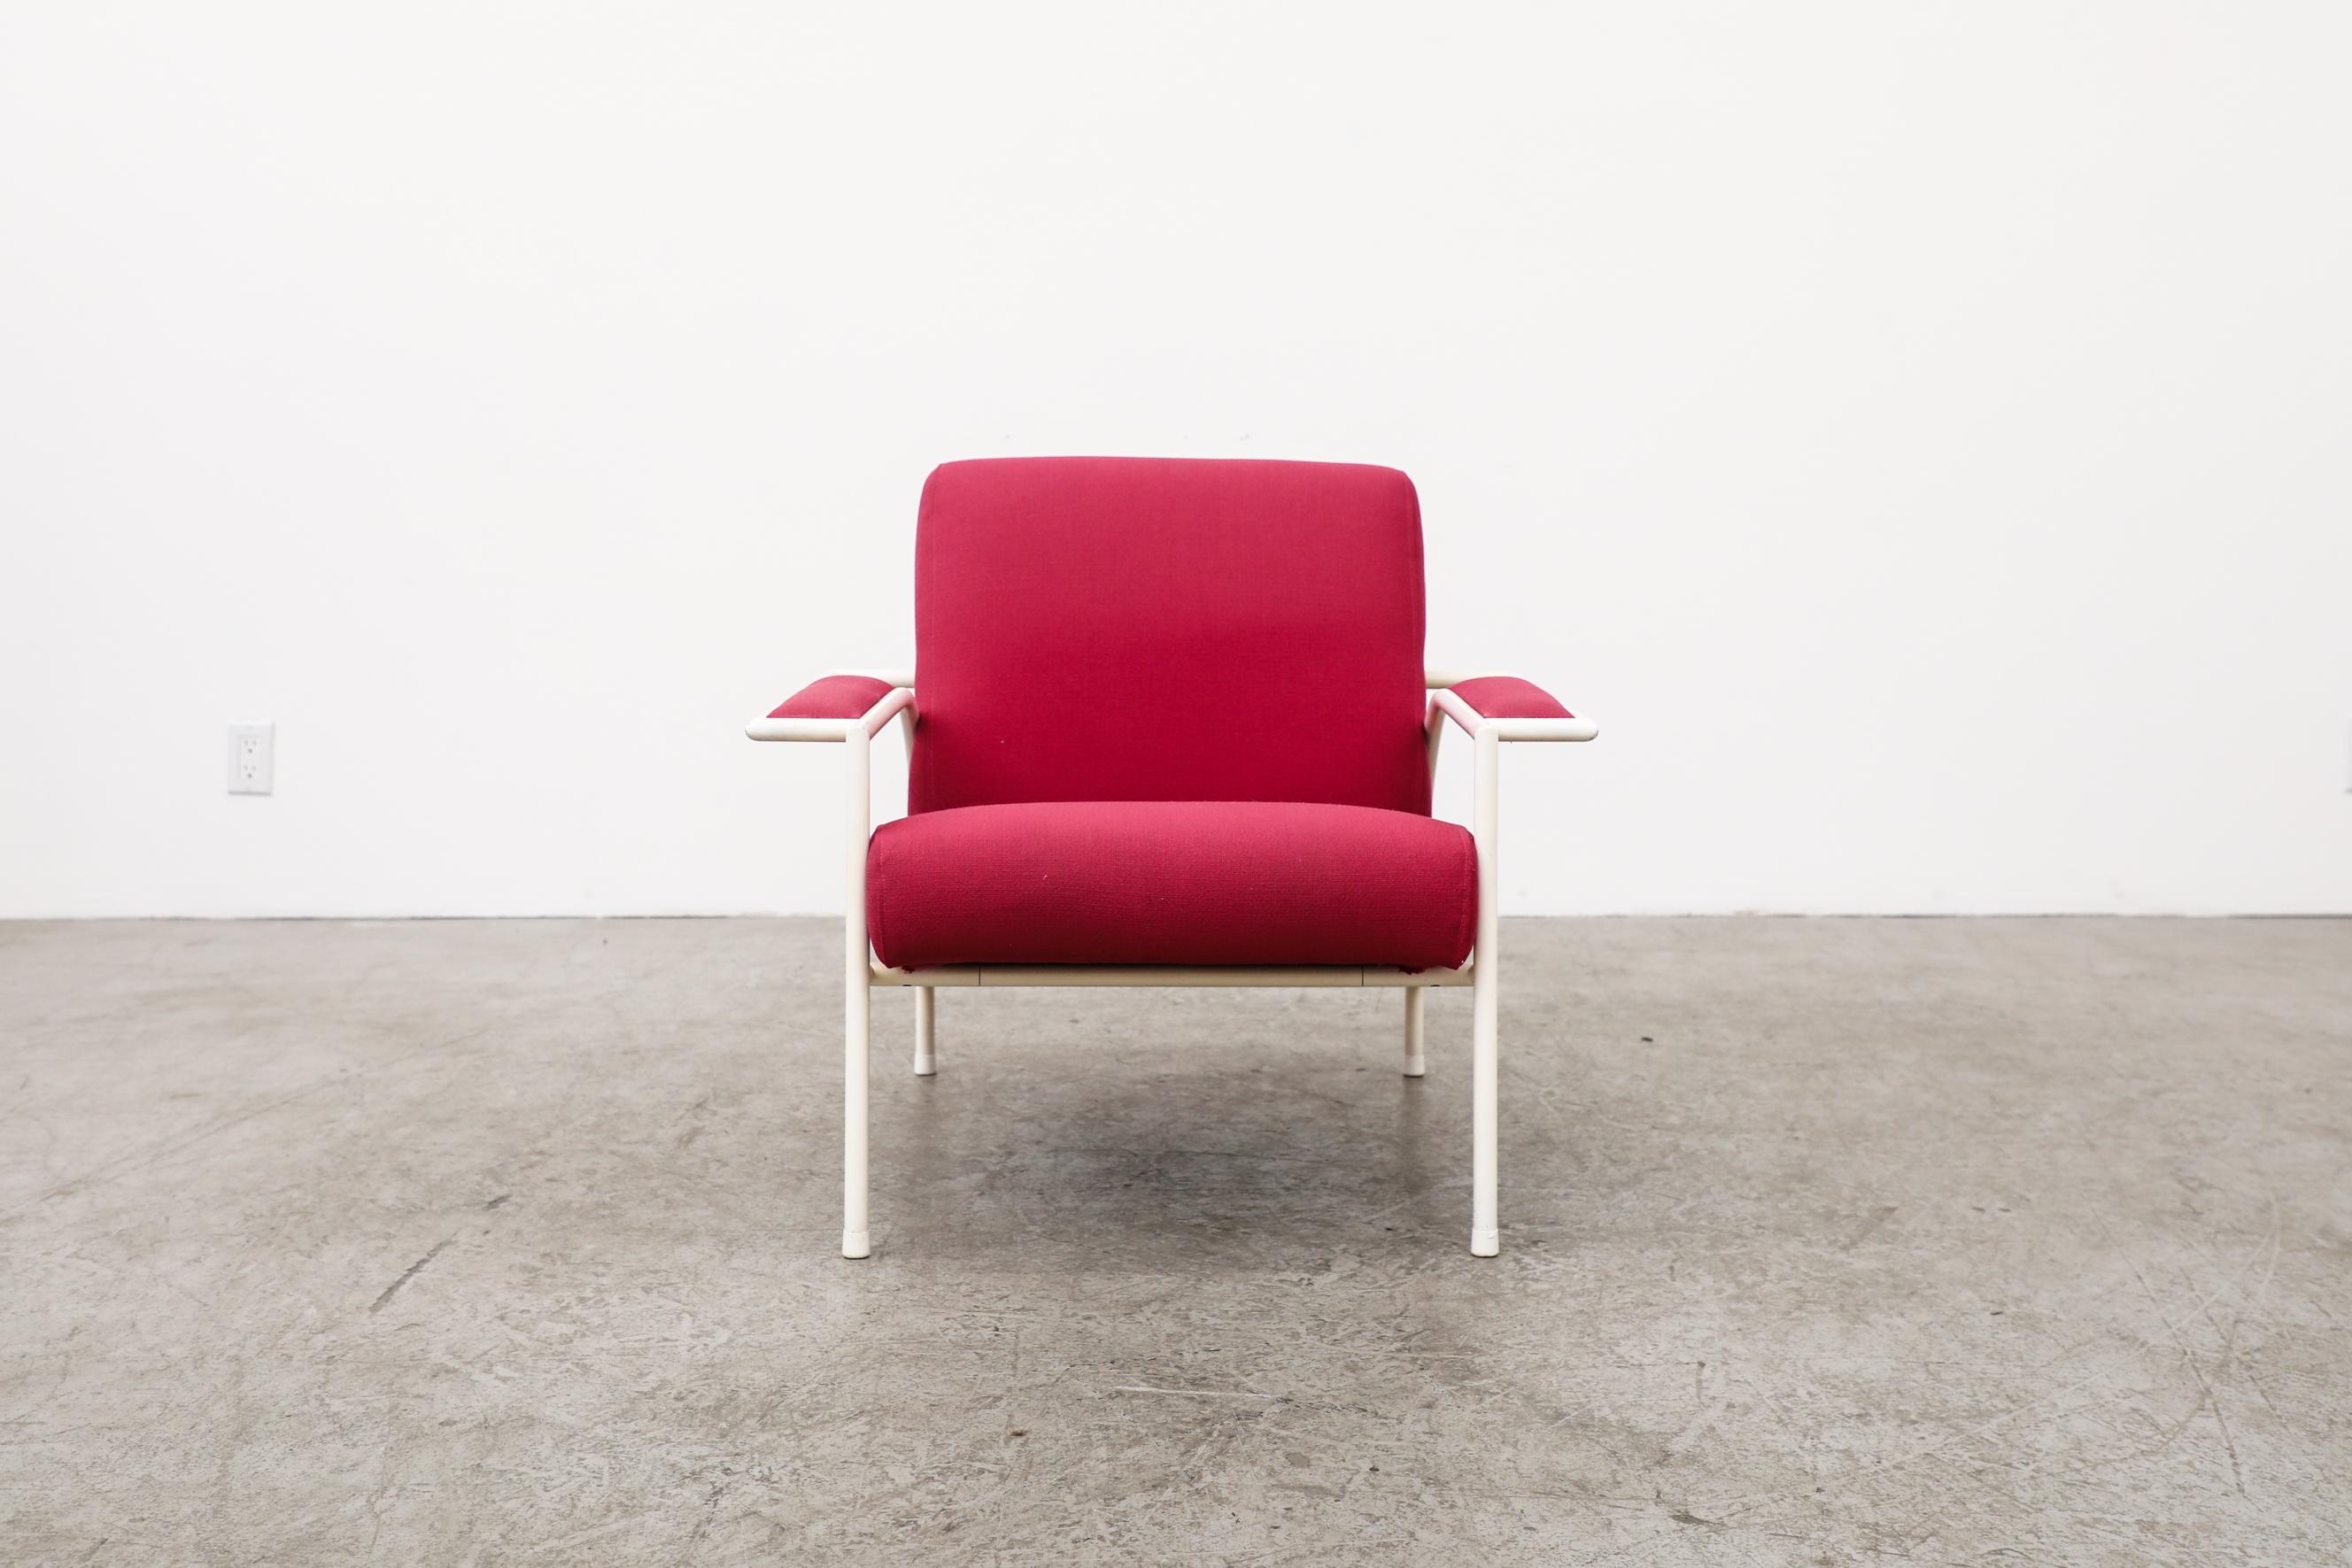 This 1980's lounge chair was designed by Gerard Vollenbrock for Gelderland with original pink upholstery and white enameled tubular metal frame. The chair is in original condition with some visible wear on frame, consistent with its age and use.